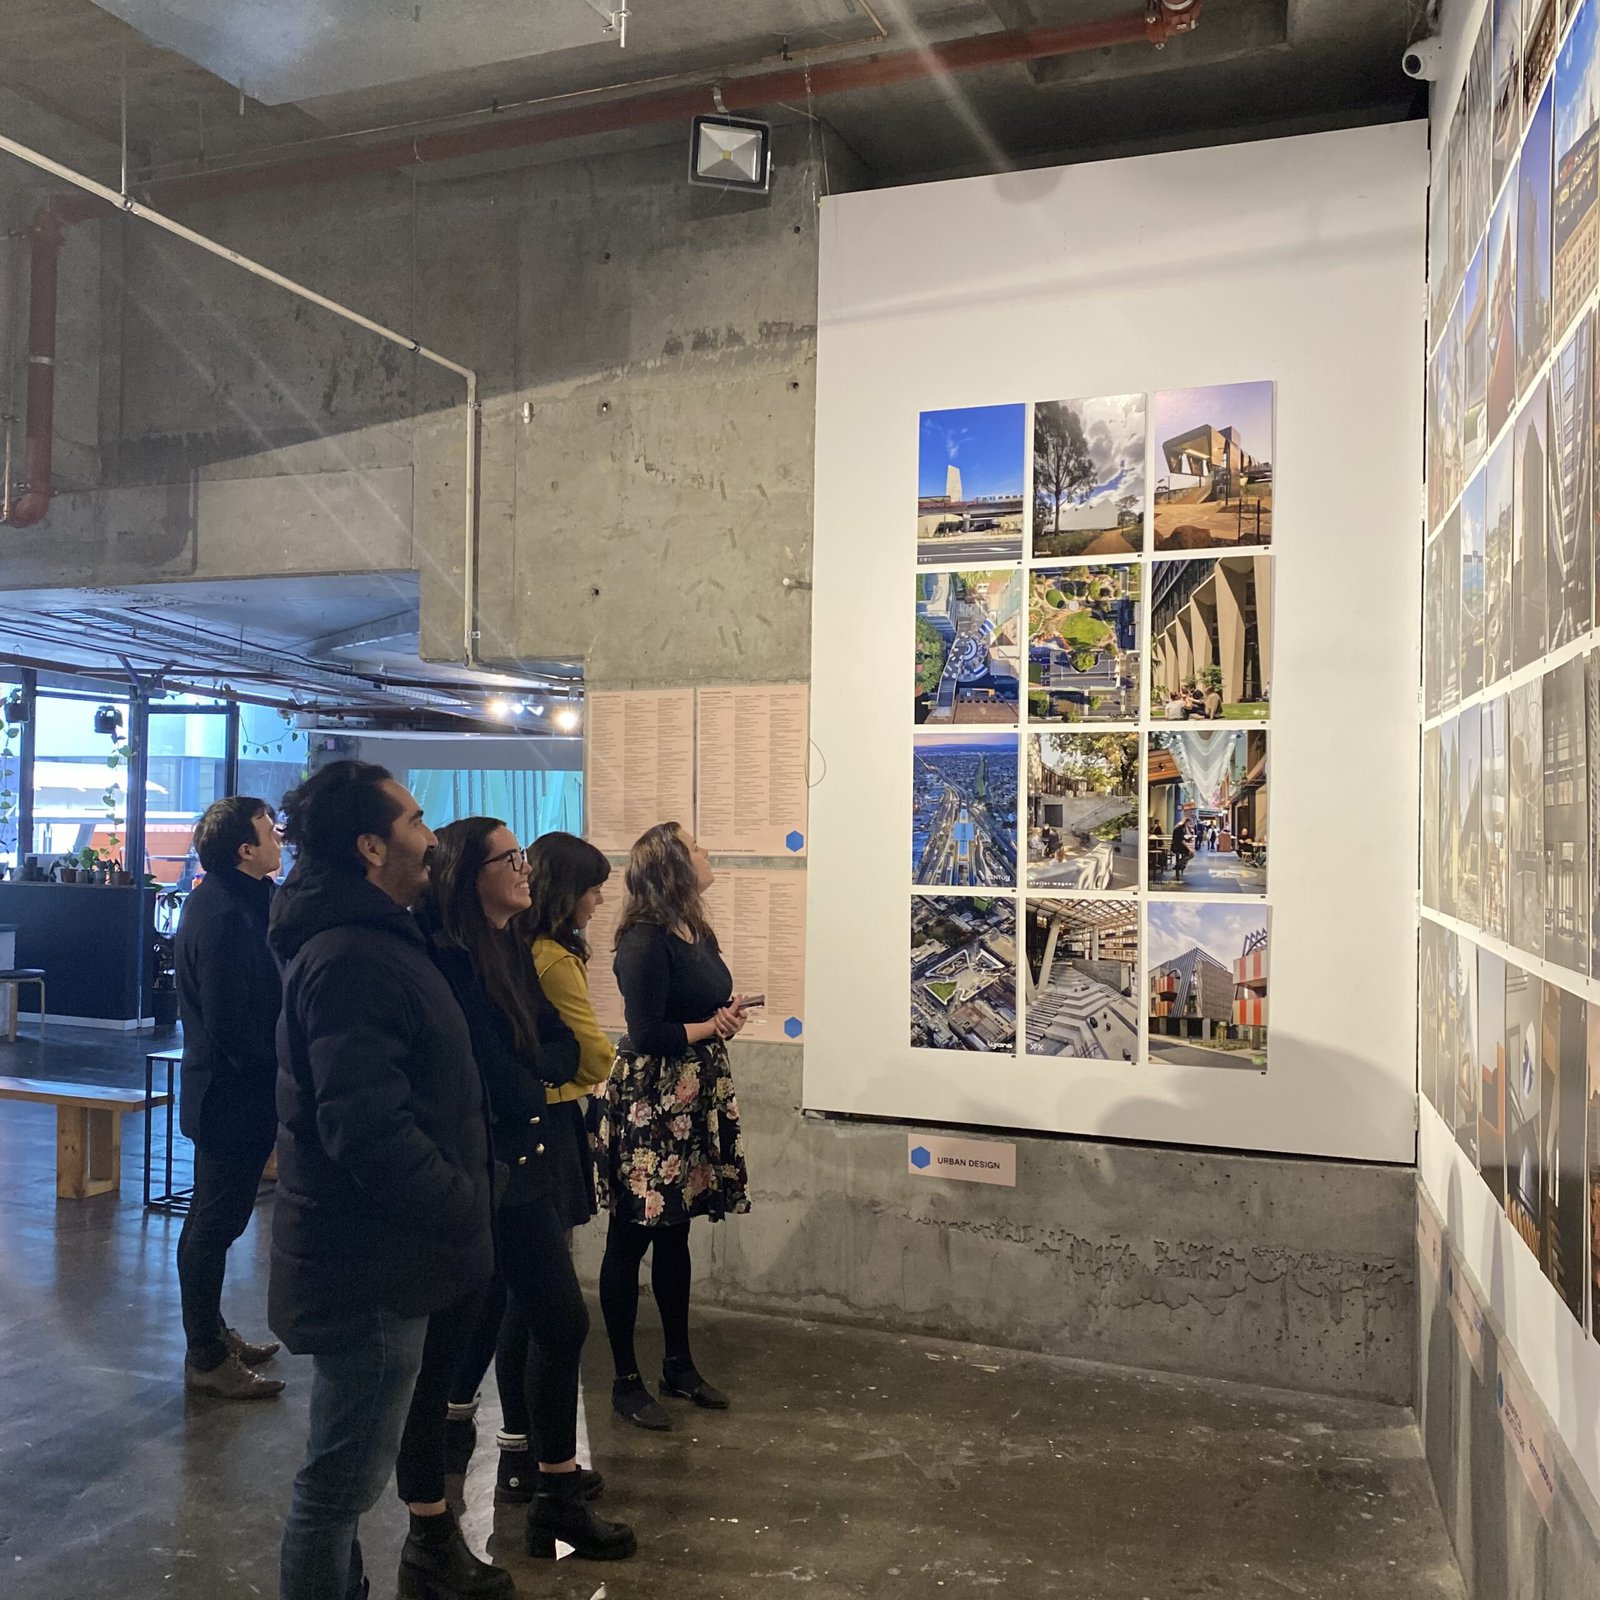 2021 Victorian Architecture Awards exhibition of entries opens